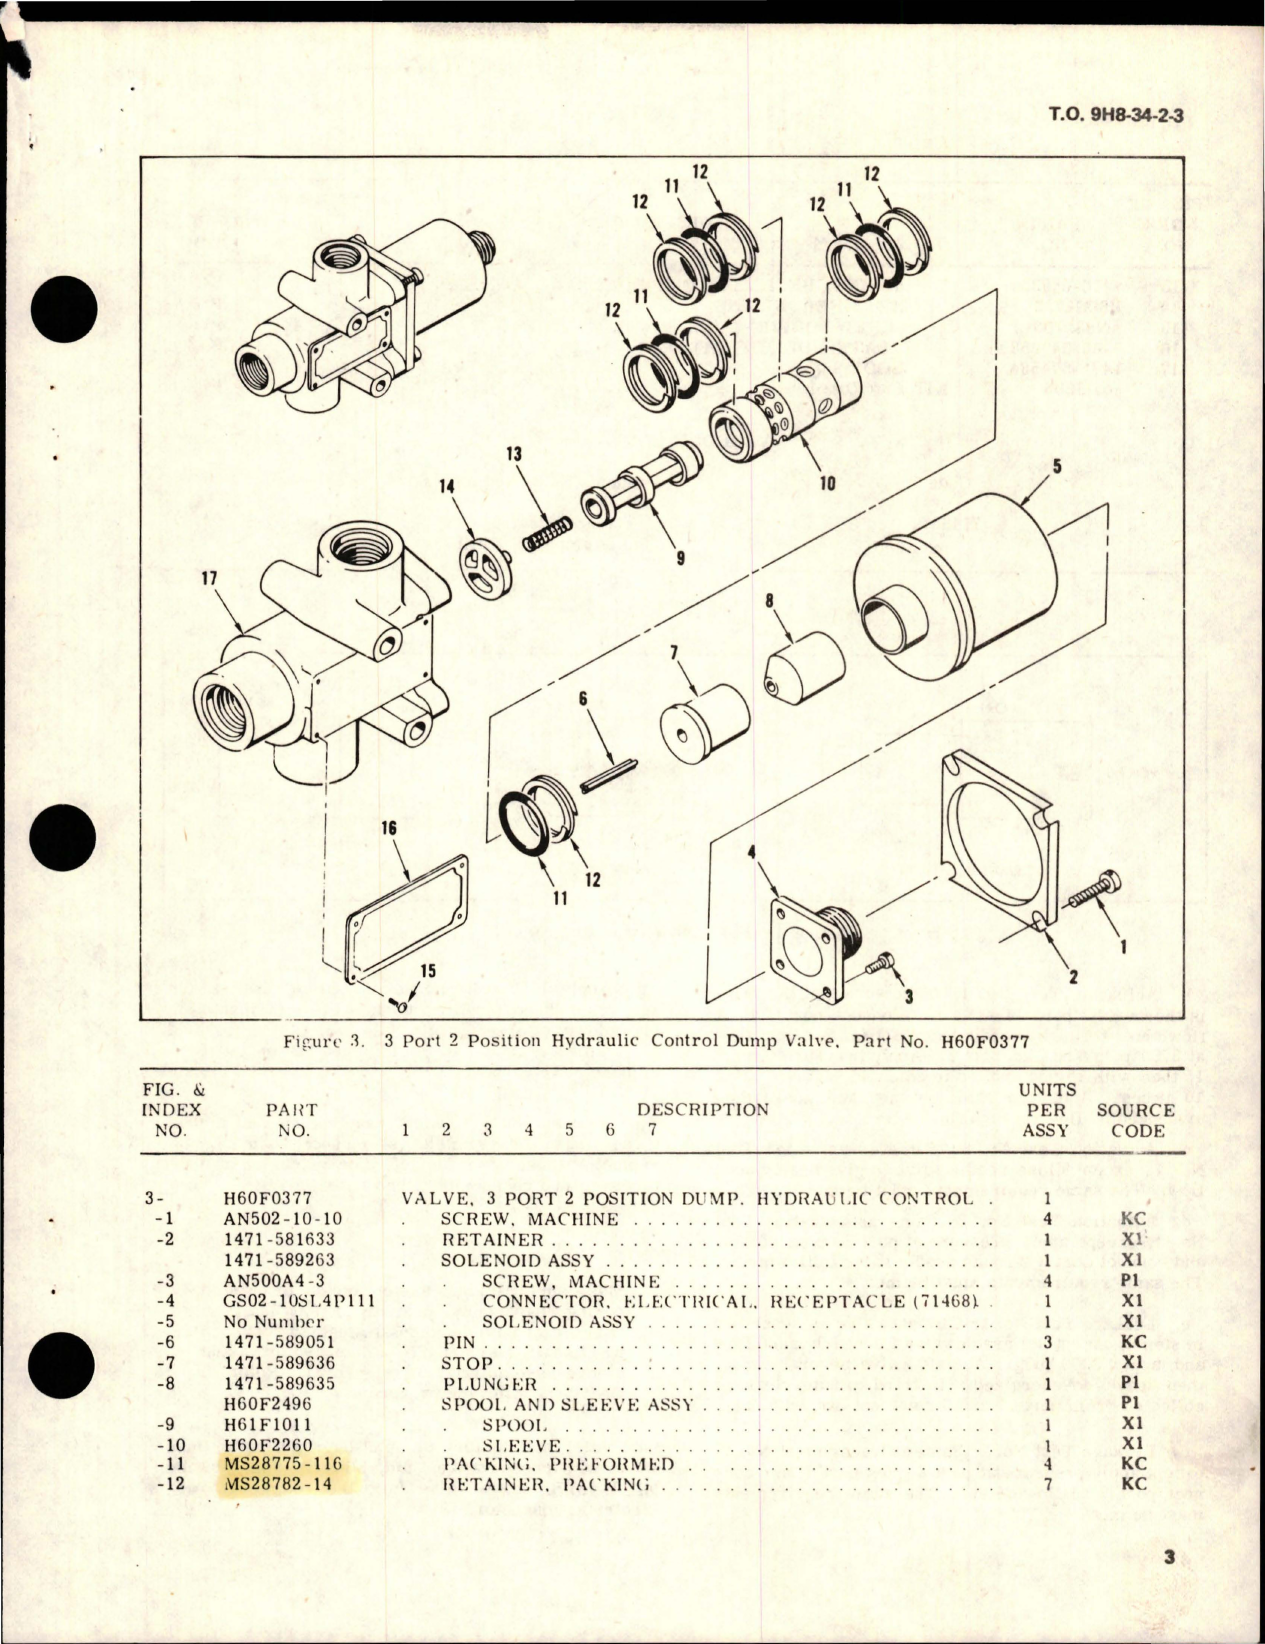 Sample page 5 from AirCorps Library document: Overhaul with Parts Breakdown for 3 Port 2 Position Dump Valve - Part H60F0377